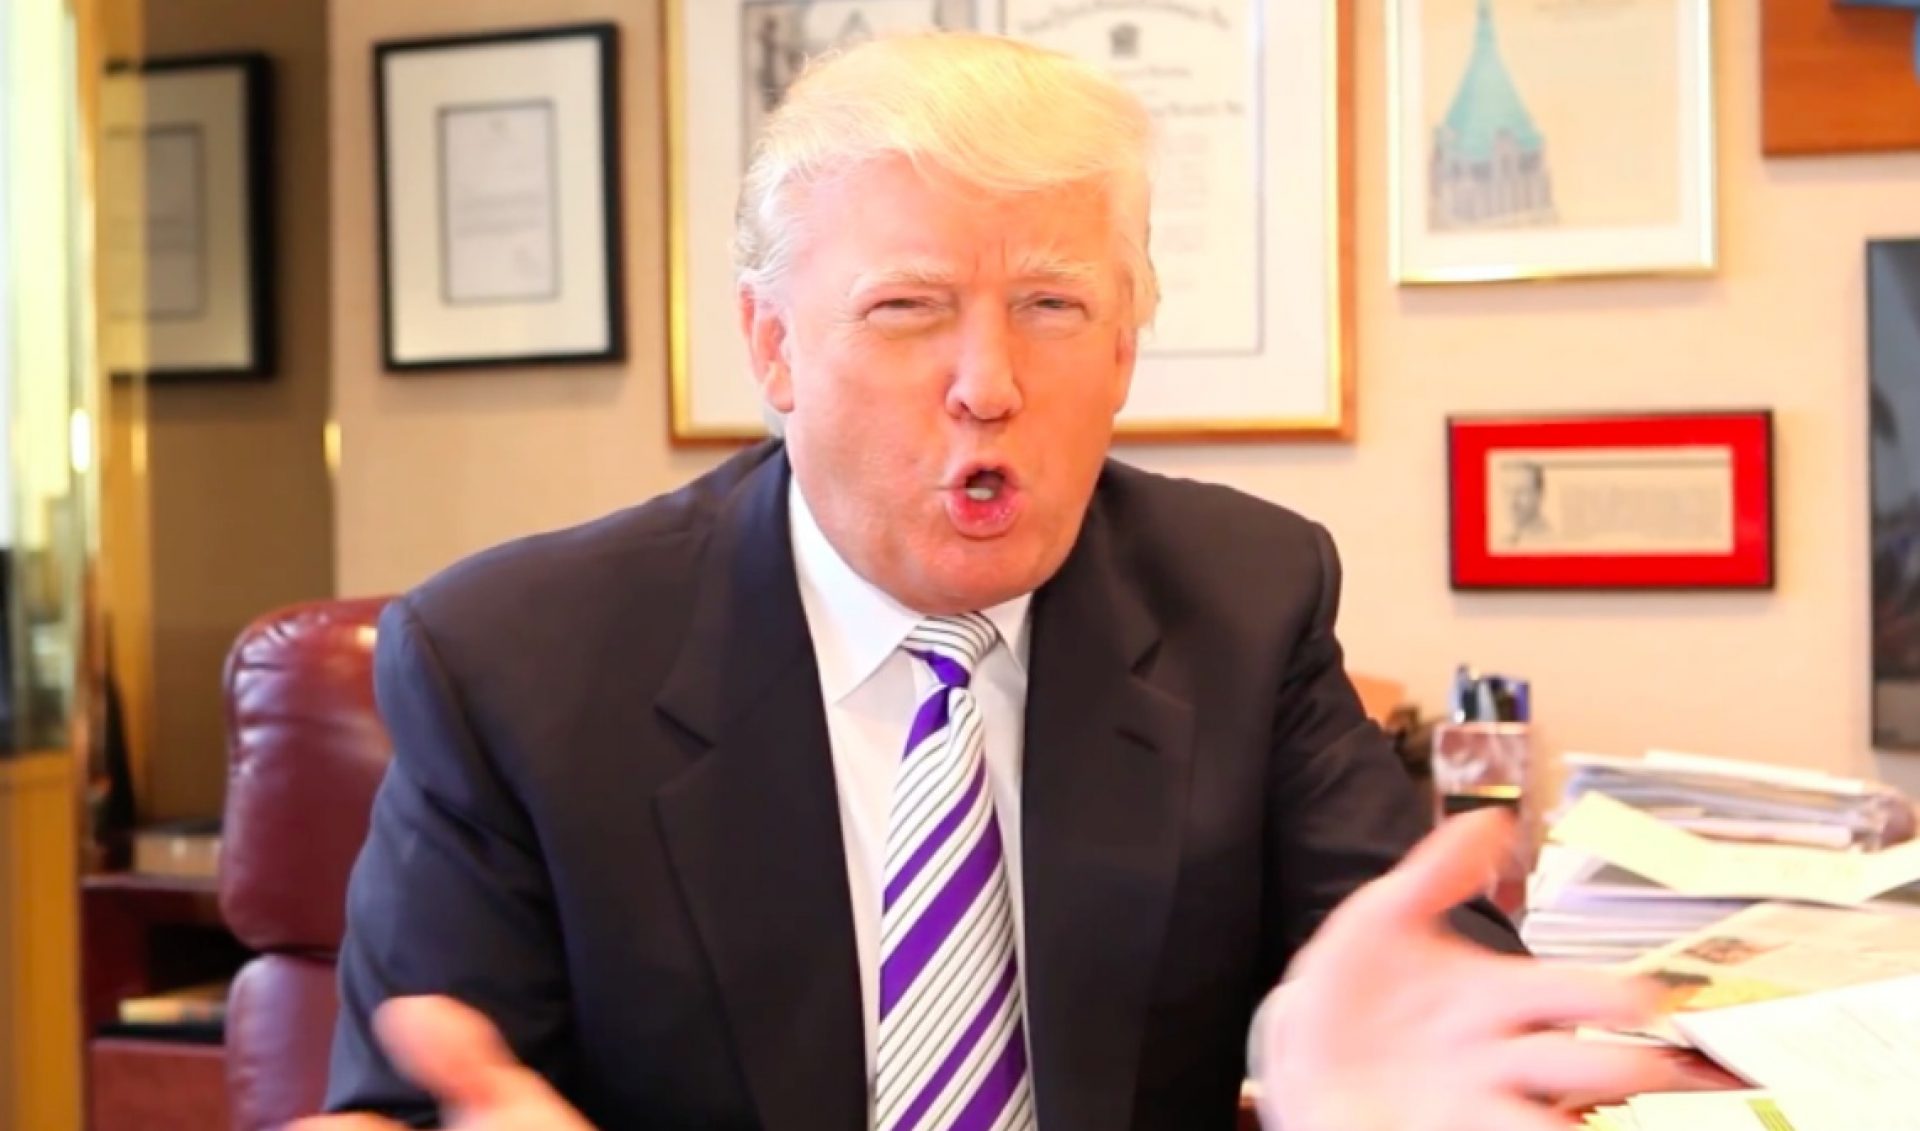 66 Of Donald Trump’s Pre-Presidential YouTube Videos Have Been Made Private